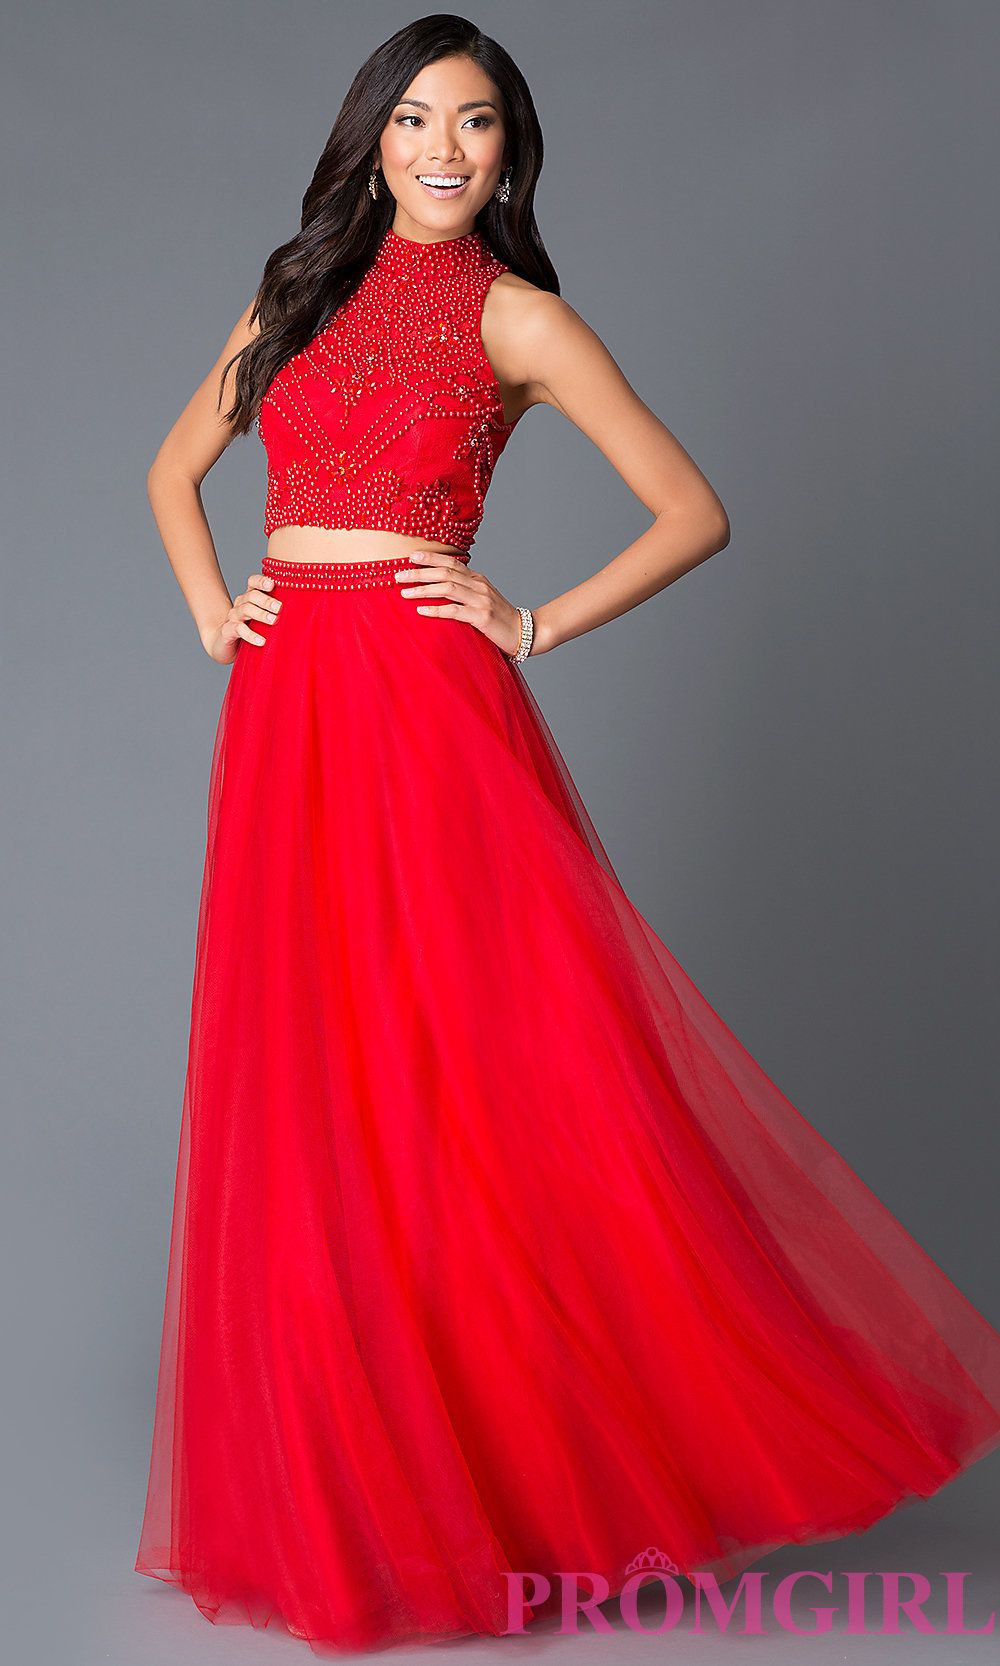 High Neck Prom Dress Hairstyles
 High Neck Red Two Piece Beaded Red Long Prom Dress Style